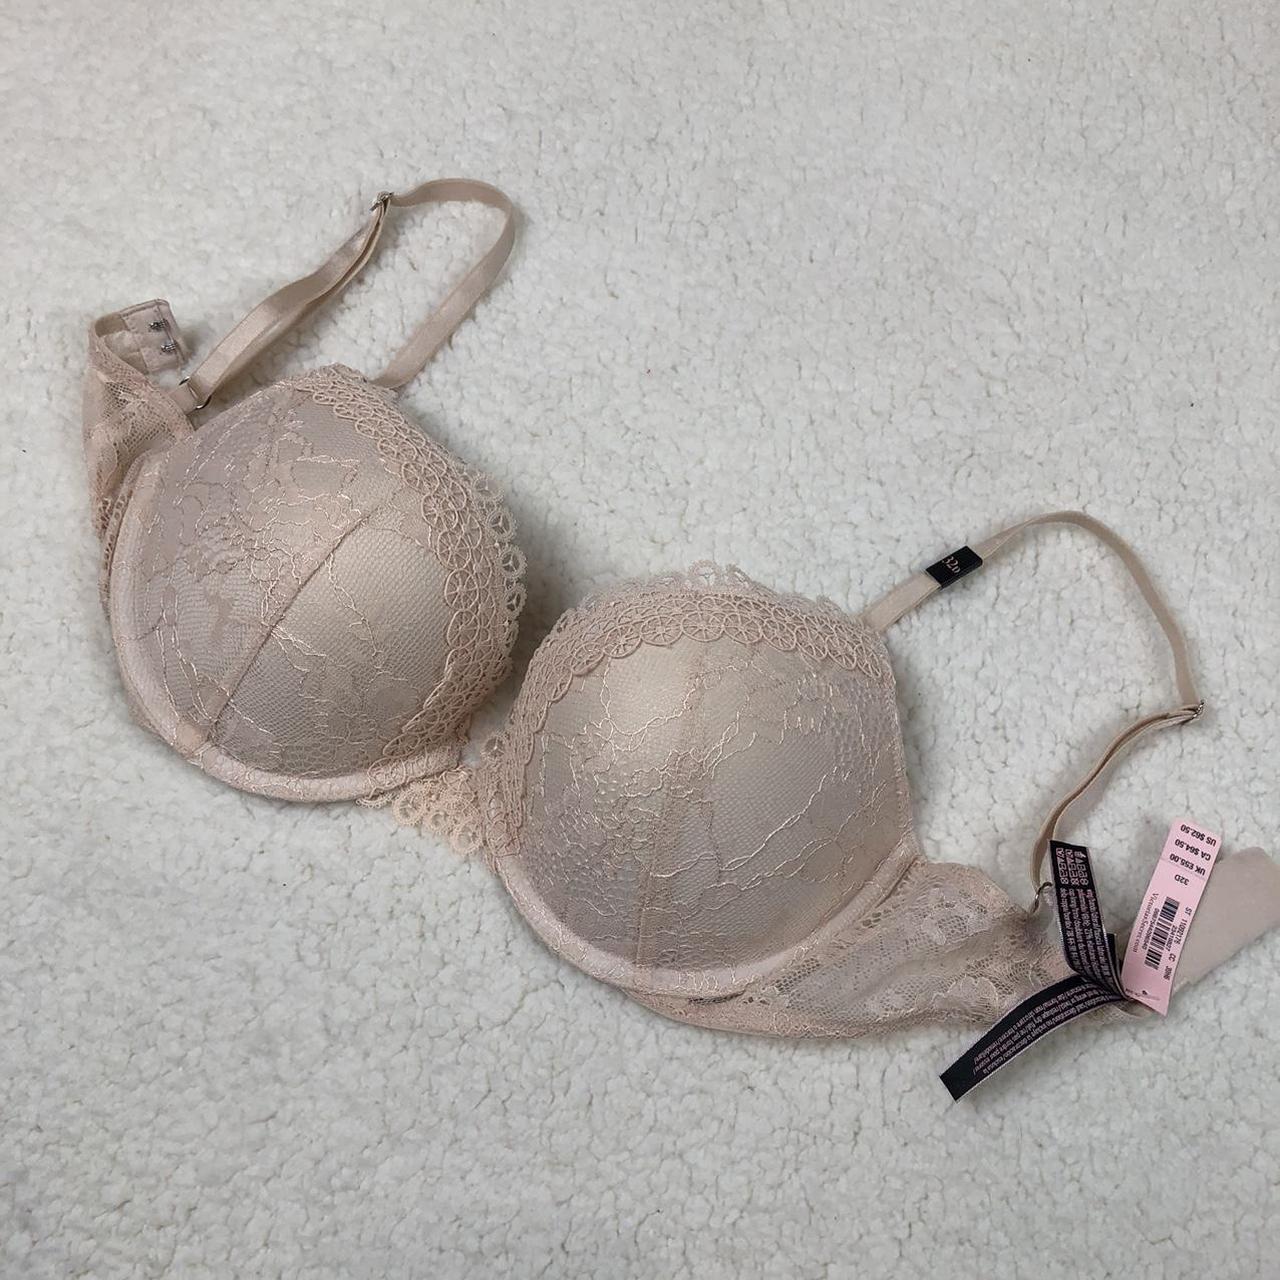 Victoria's Secret - Good bras are the base for every amazing